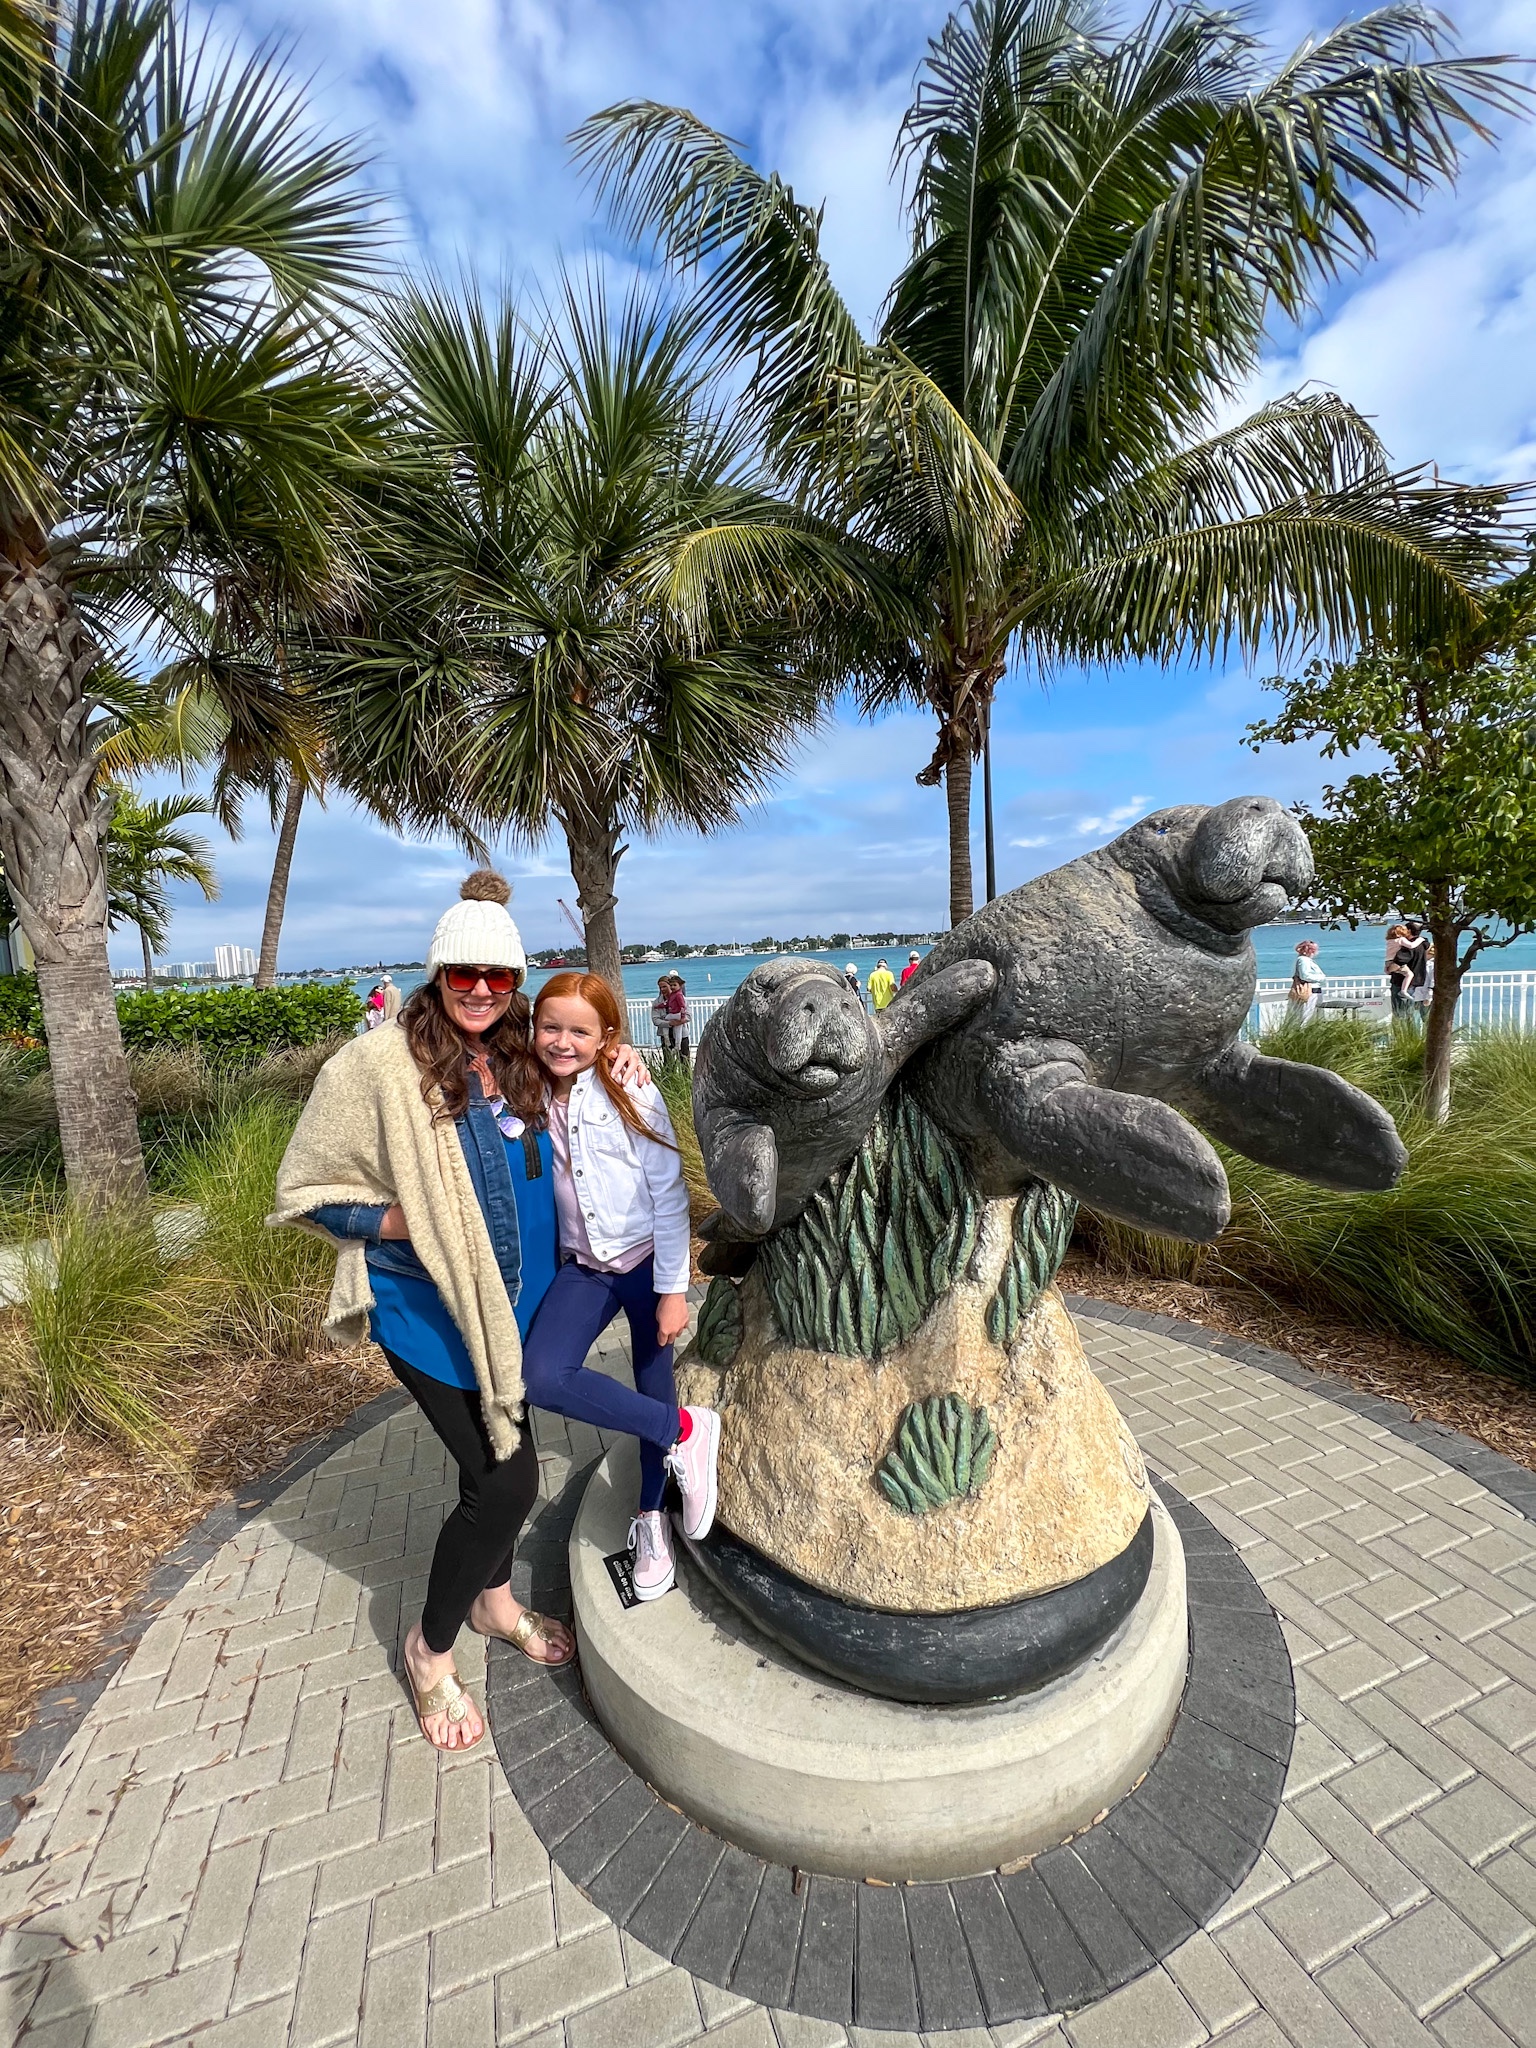 Where to See Manatees in West Palm Beach